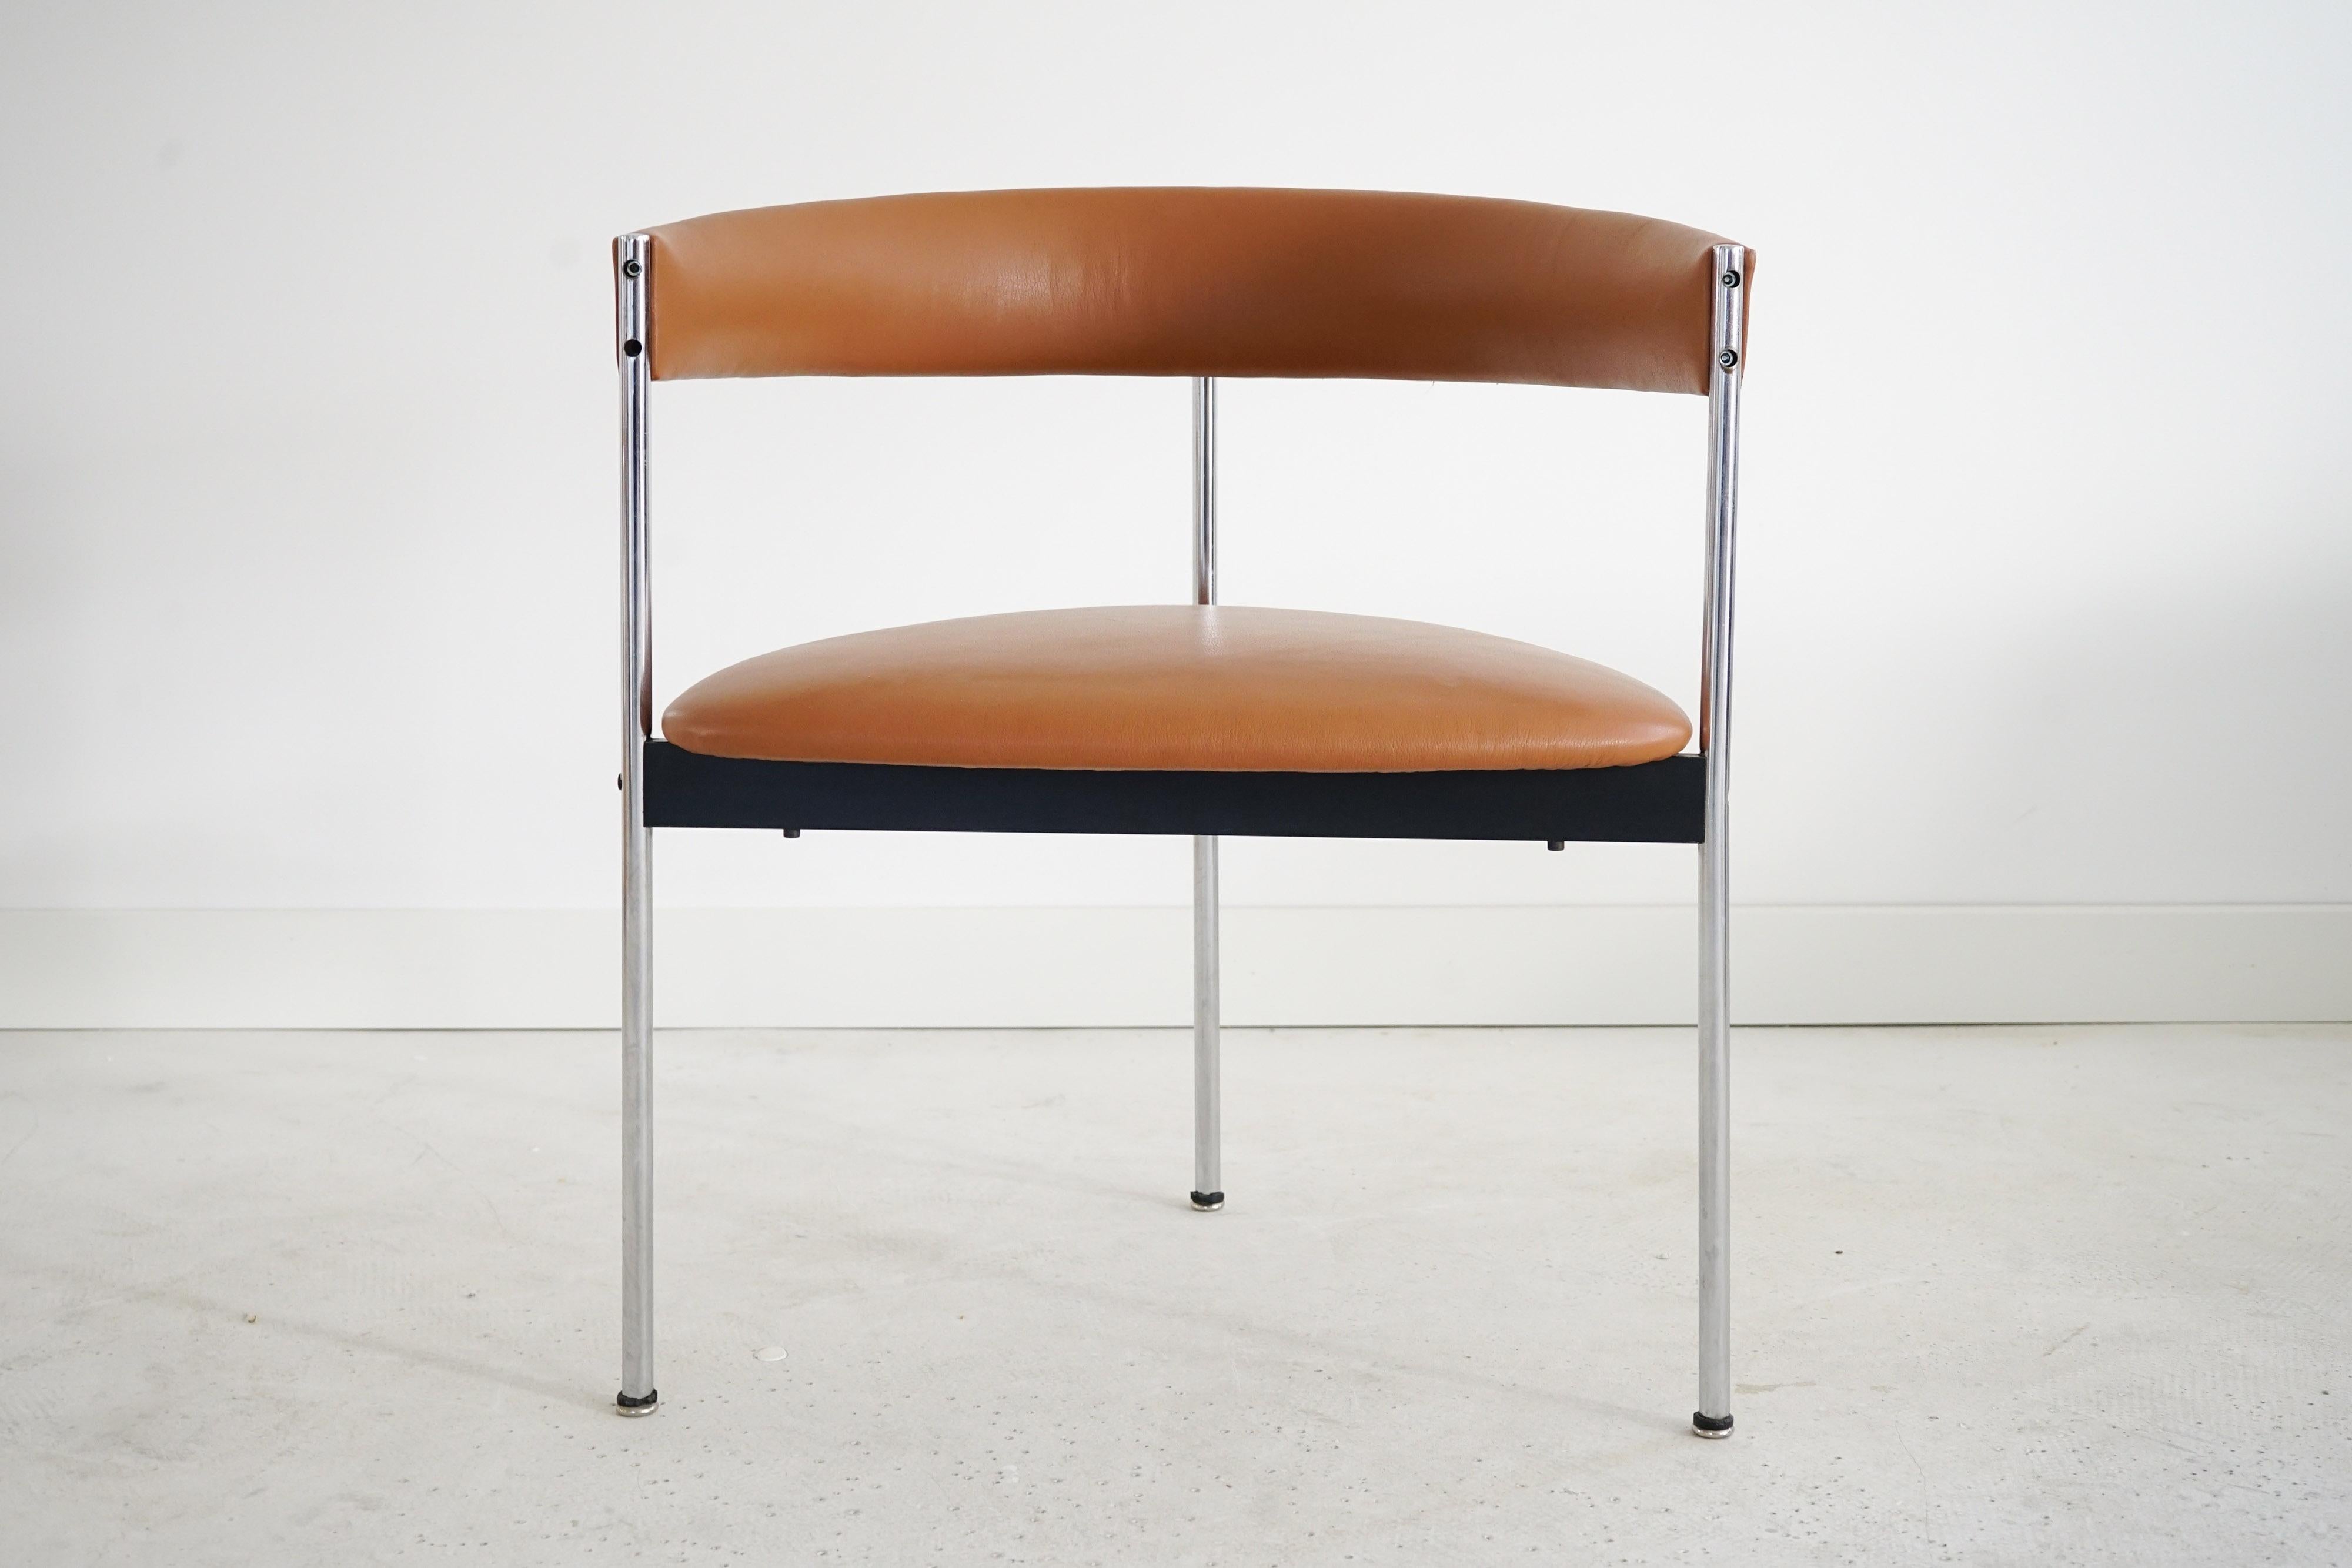 Three-legged chairs by Dieter Wäckerlin for Idealheim, 1970s. Set of four chairs. The chairs with chrome-plated frames have been newly upholstered and are covered with cognac-colored leather. They are in very good condition.